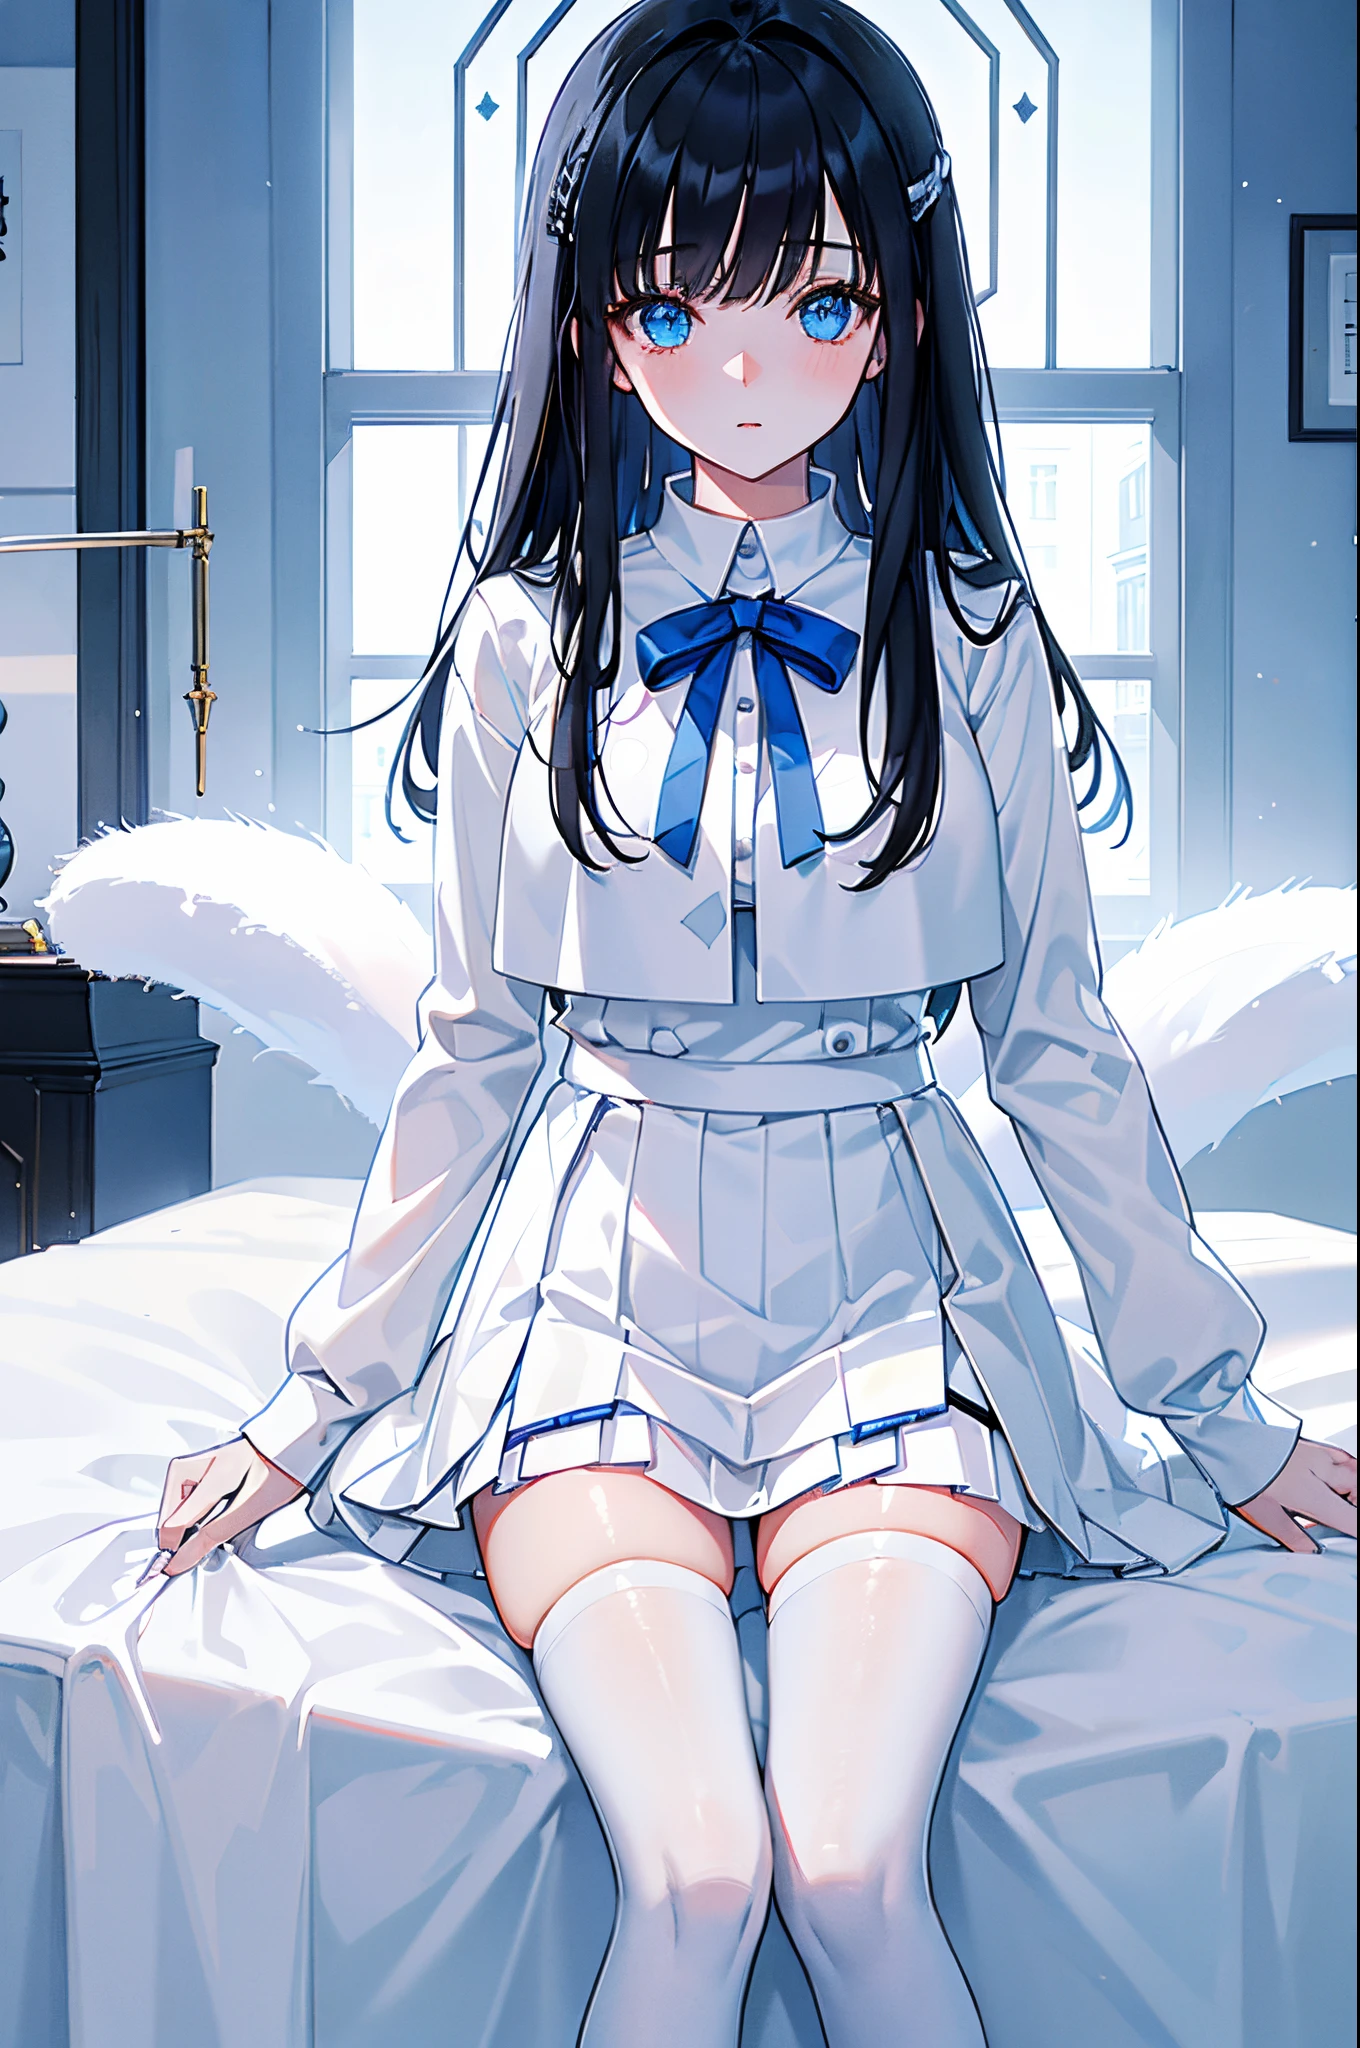 A dark-haired　blue eyess　White mini skirt　White sweater　White tights　white fur coat　in a house　pension　​masterpiece　Top image quality　Clear 　cinematic shadow　Increased attractiveness of the eyes　Clear the shine of the eyes　Draw eyelashes neatly　Perfect Eye　A detailed eye　Sharpen image quality　Sharpen eye writing　Clear eye shape